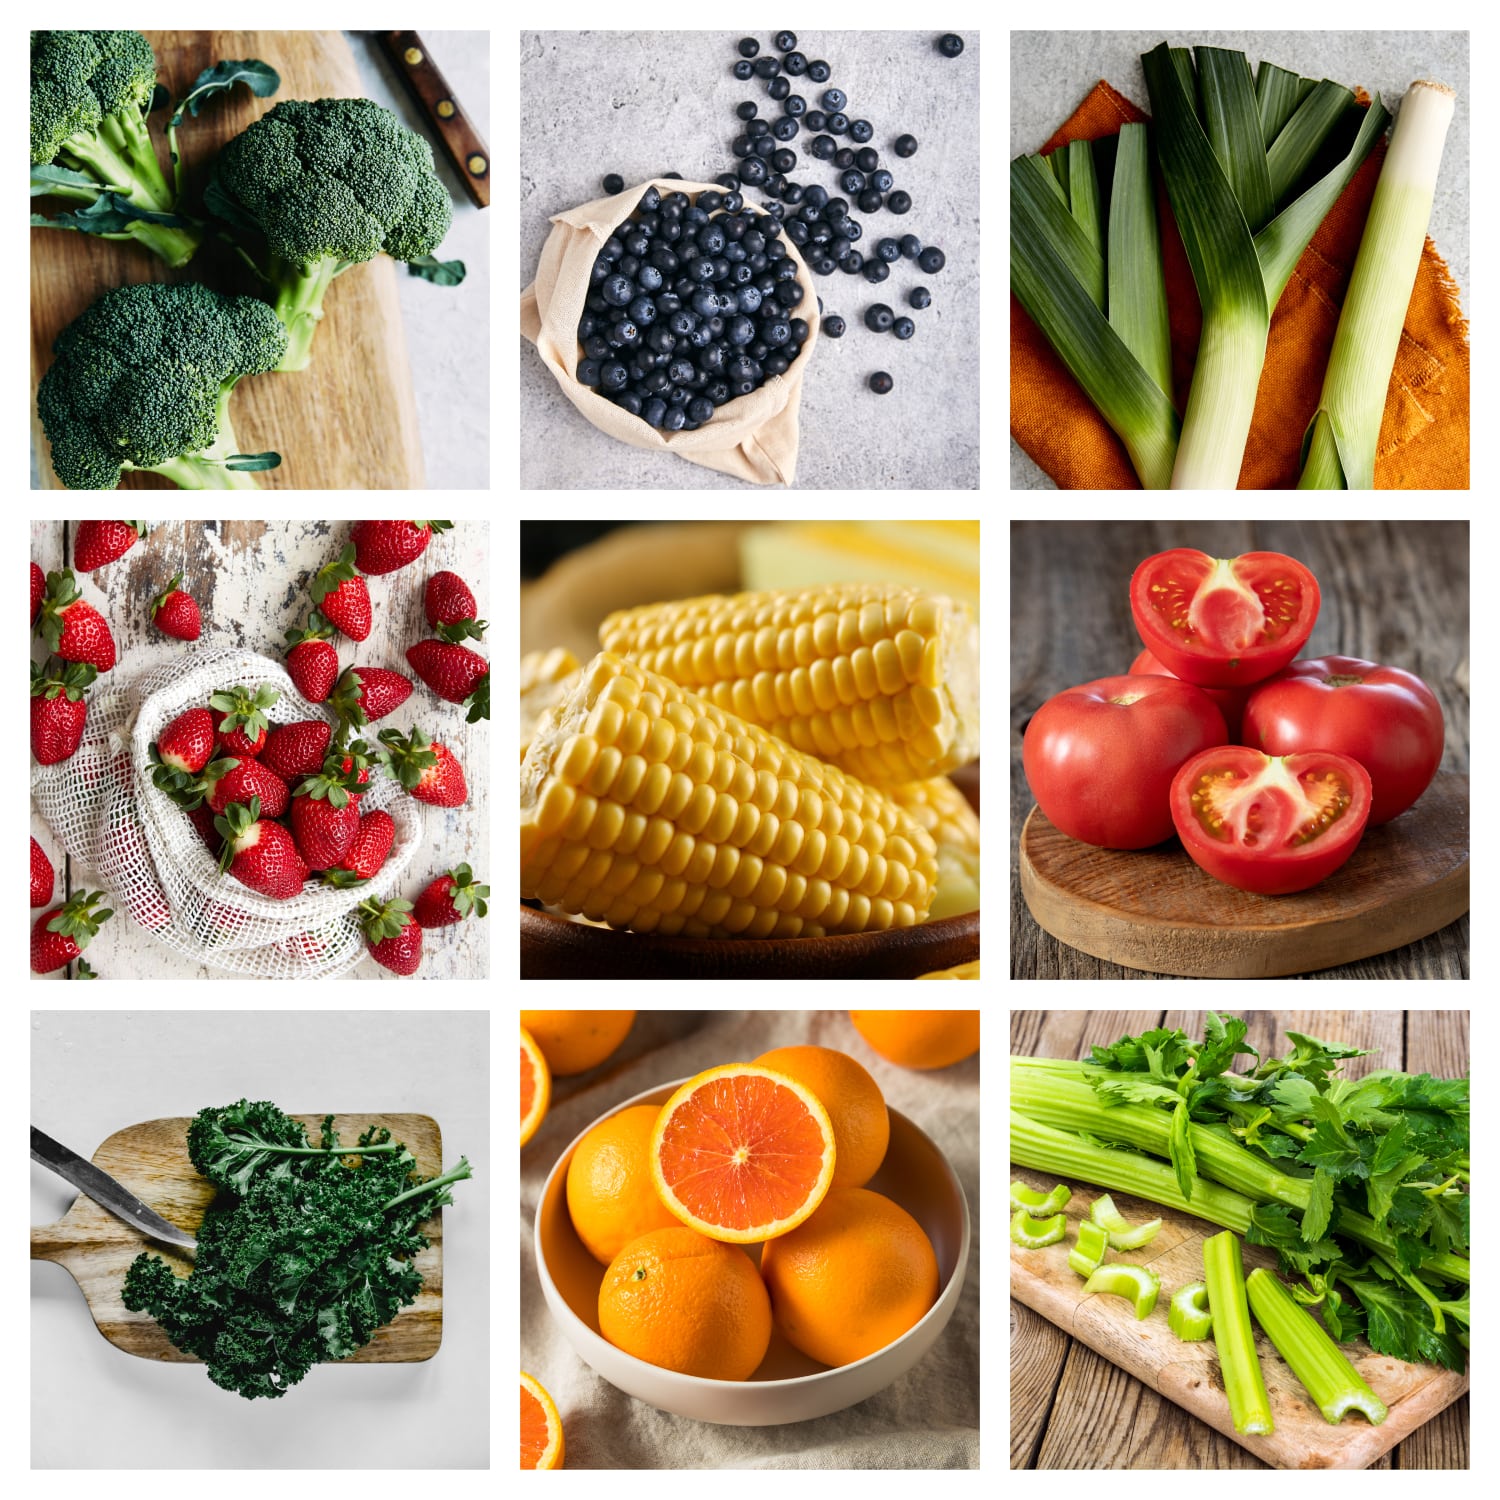 Dave's Market Update for the 2nd of August 2023 includes broccoli, blueberries, leeks, strawberries, corn, gourmet tomatoes, kale, imperfect navel oranges, and celery.